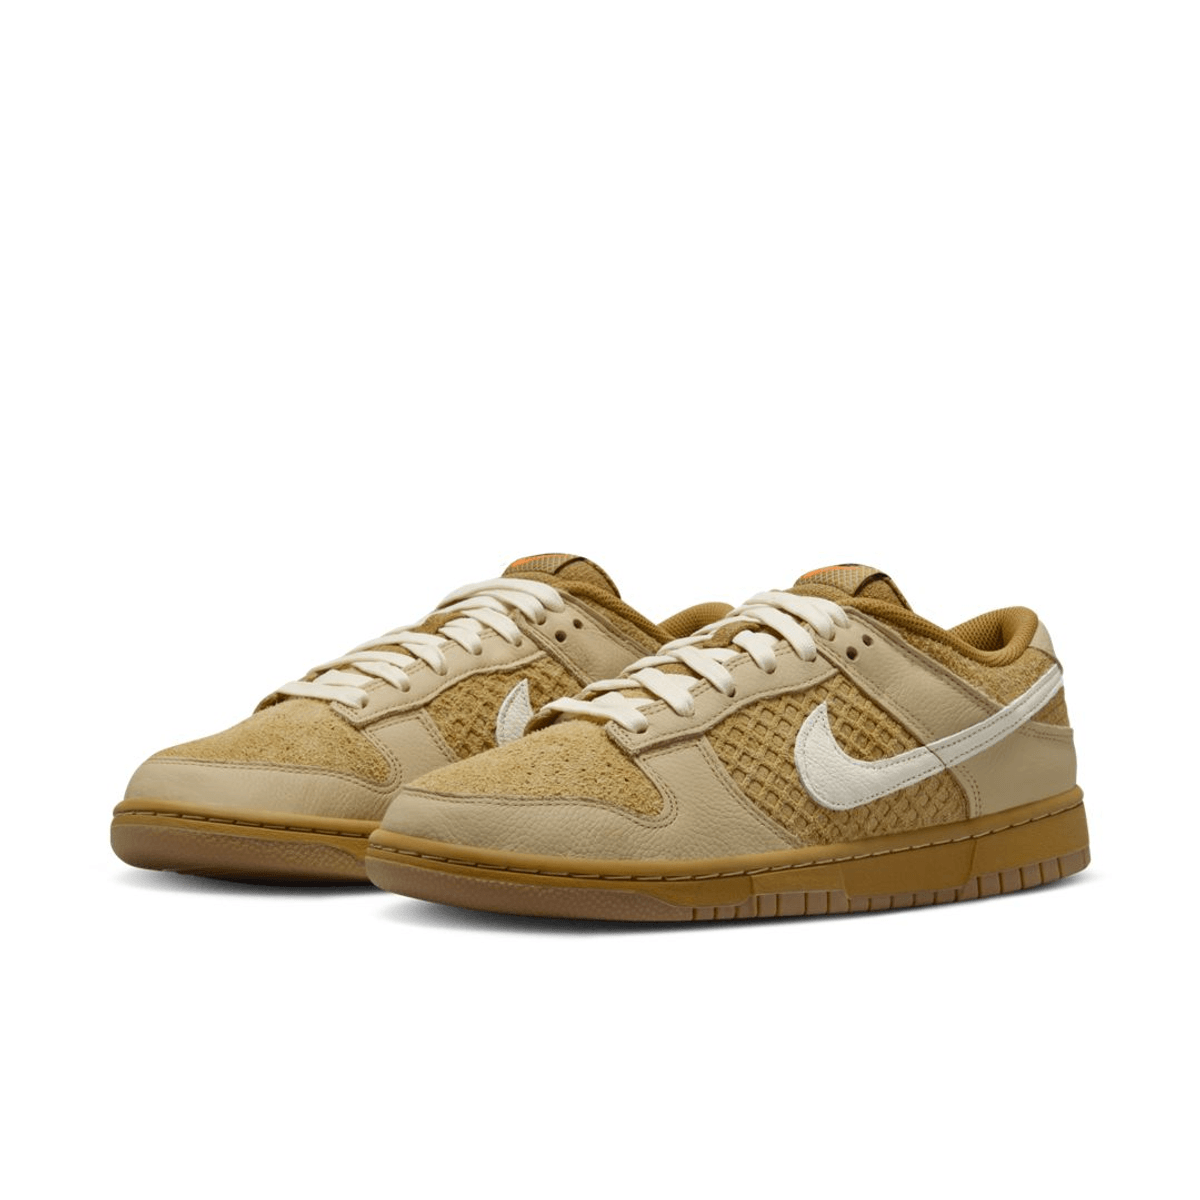 Pass The Syrup, The Nike Dunk Low Waffle Are Ready For Breakfast